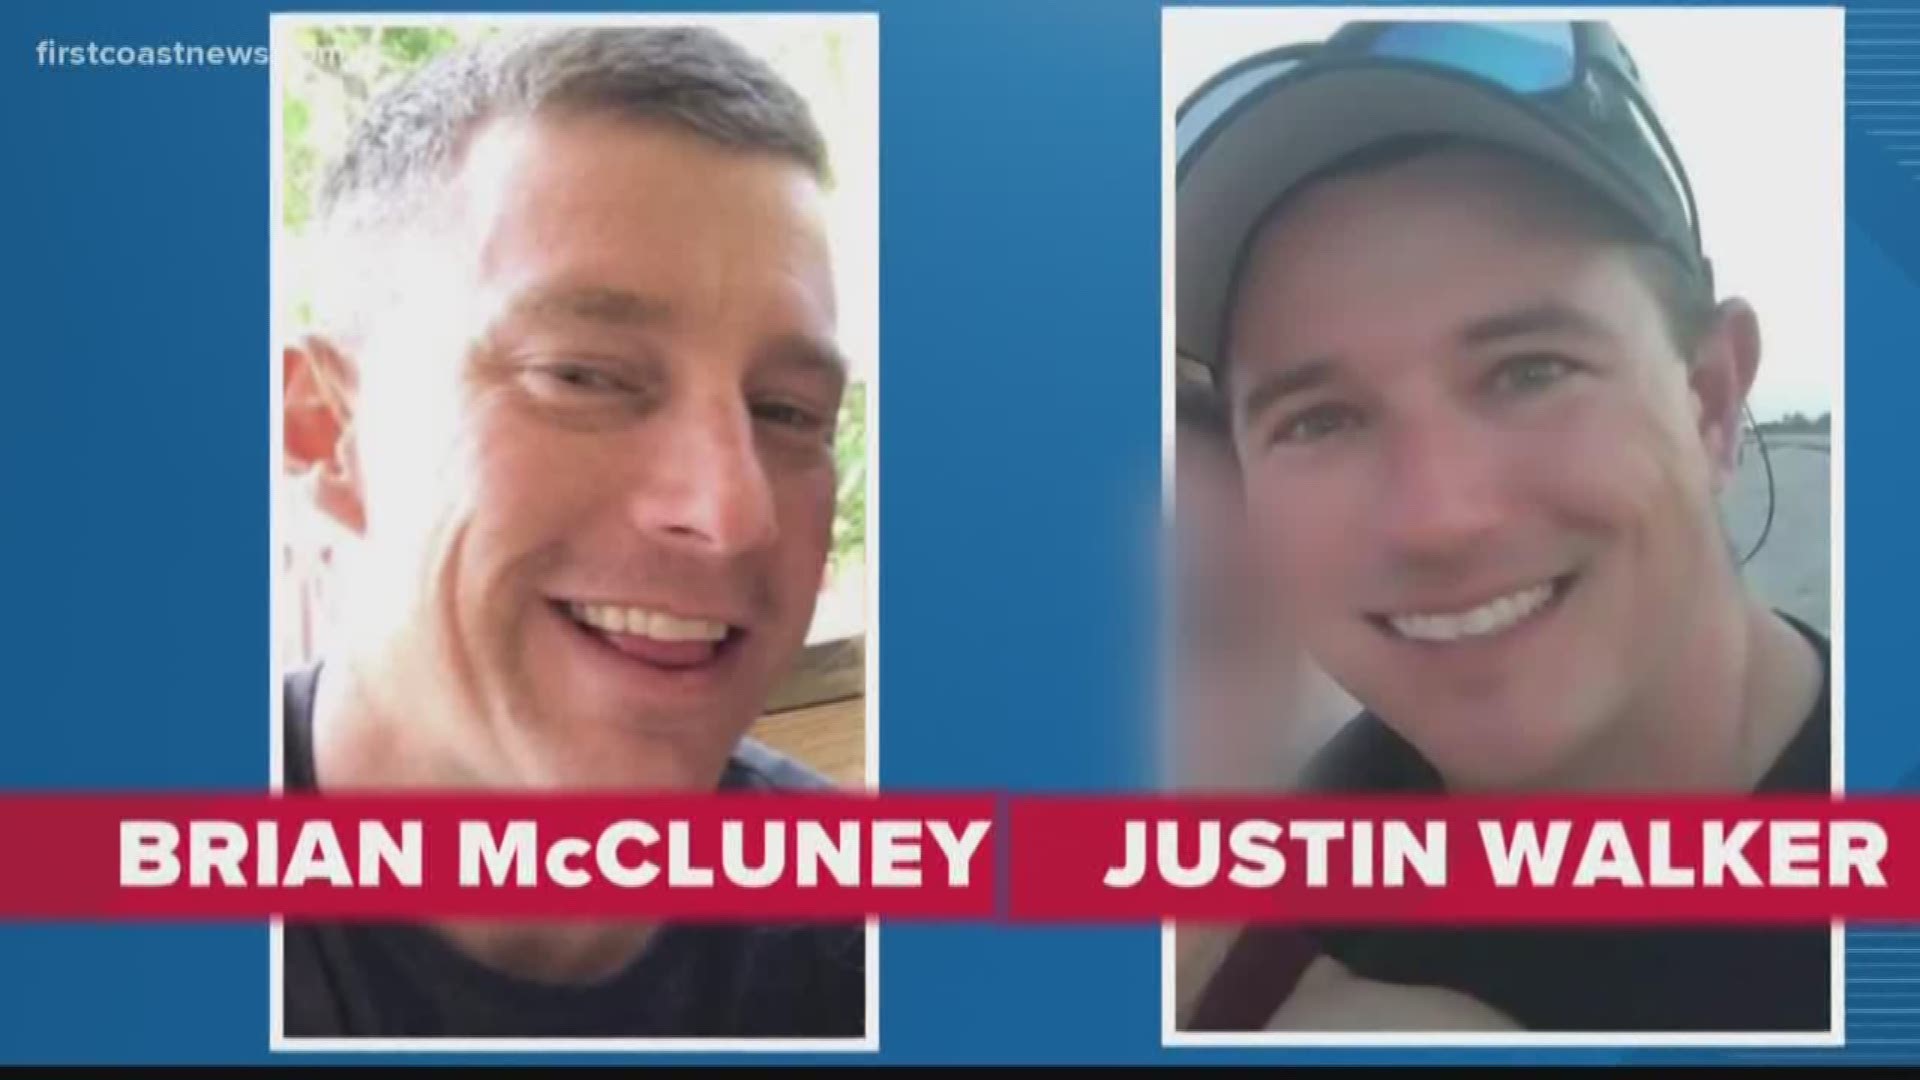 JFRD's Brian McCluney and Fairfax's Justin Walker were last seen leaving the 200 Christopher Columbus boat ramp Friday near Port Canaveral.